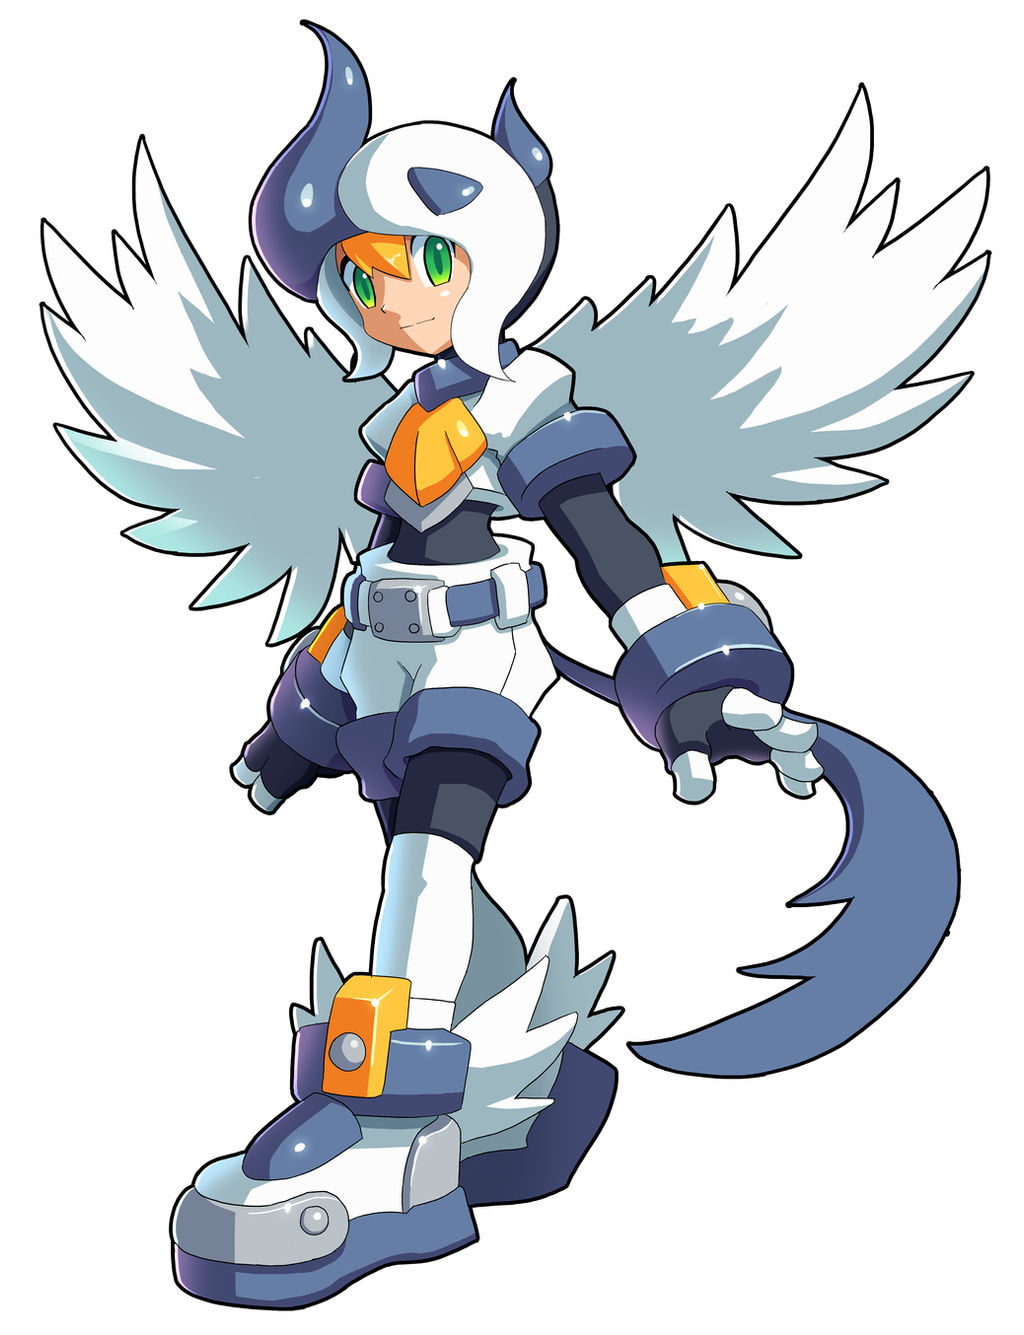 Commission: Roll and Mega Absol Fusion